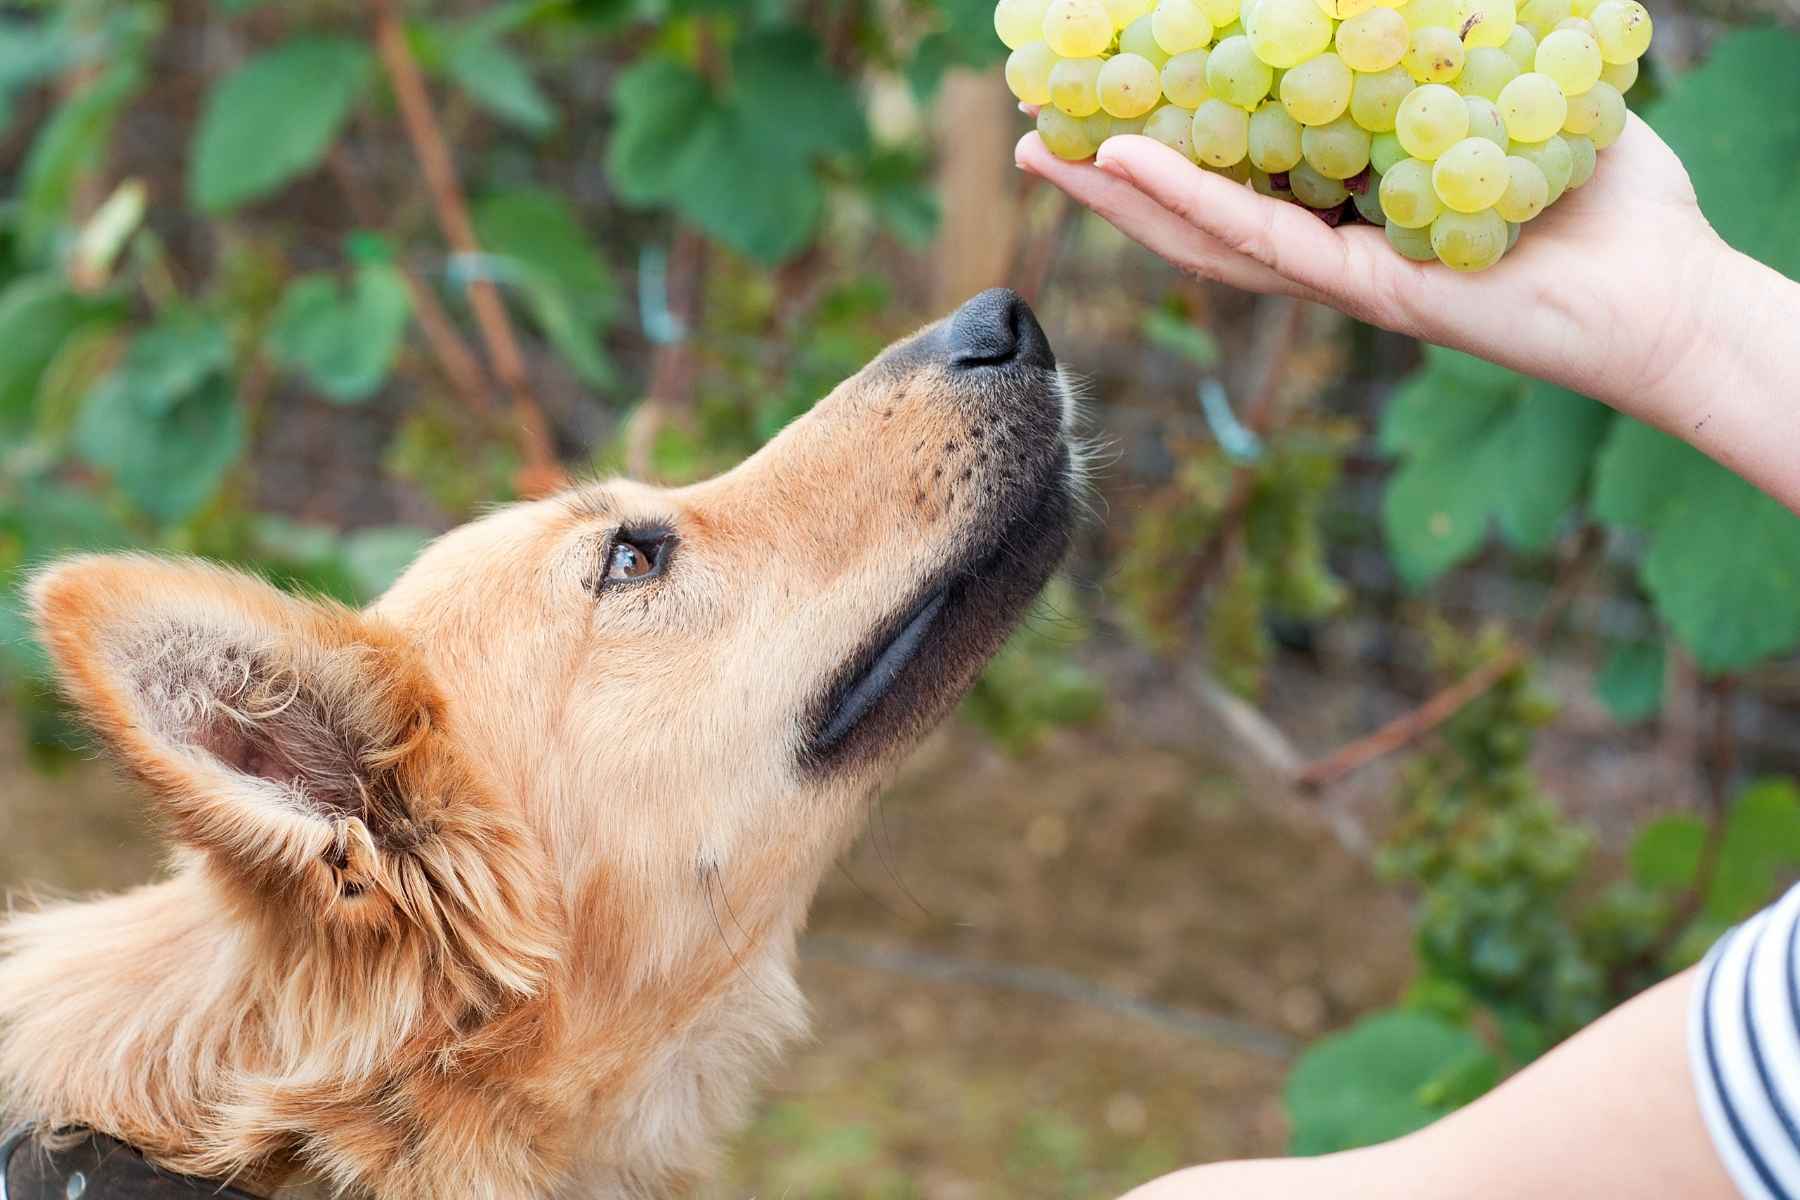 Dog sniffing at grapes in its owner's hand